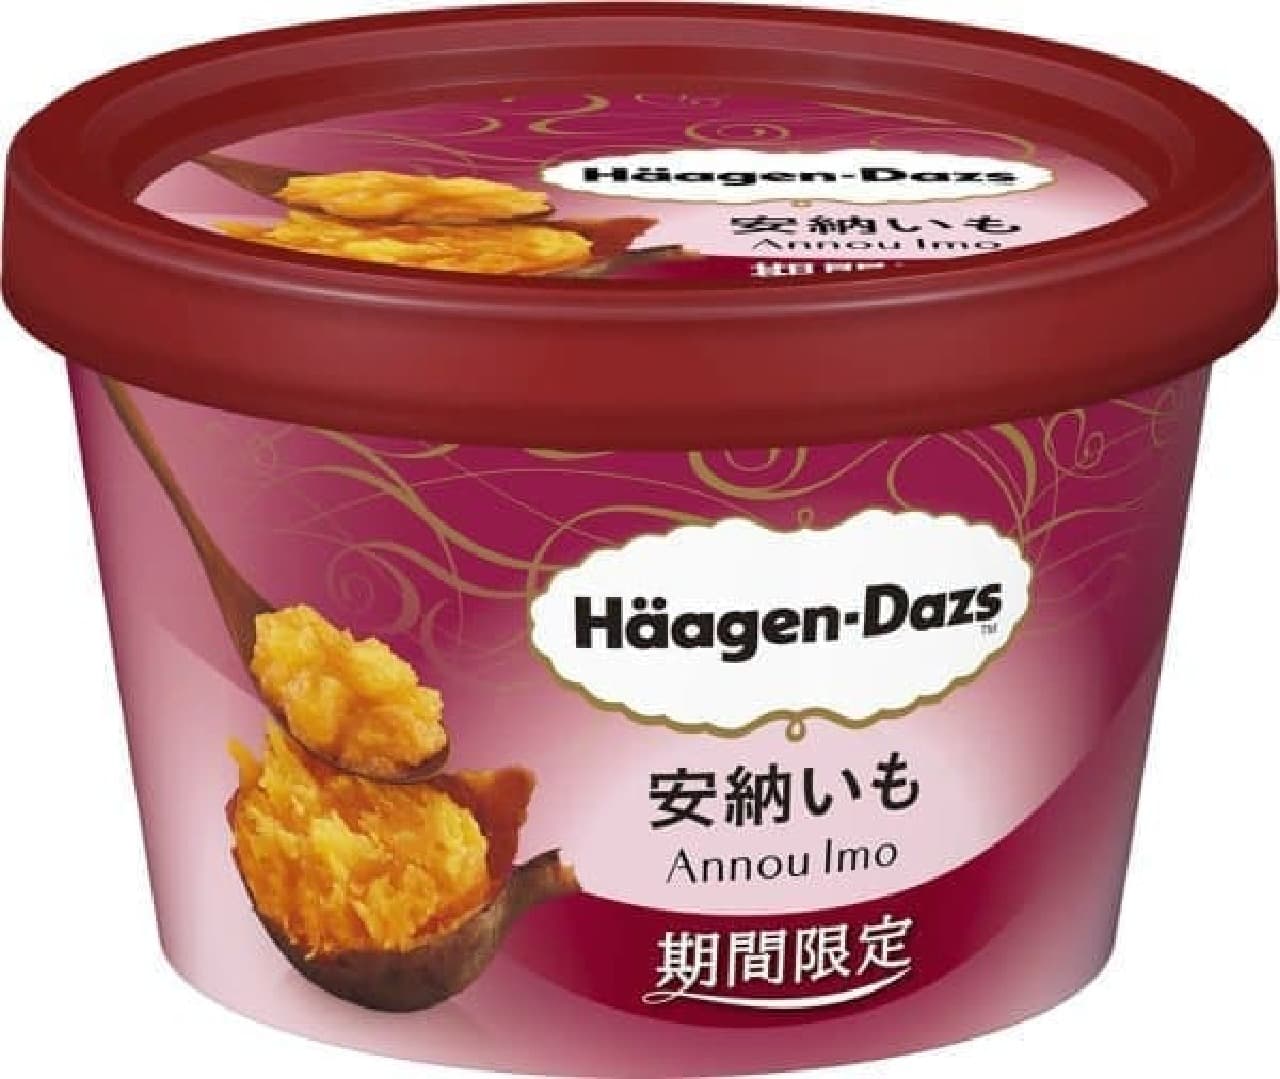 Haagen-Dazs Mini Cup for a limited time "Annoimo"